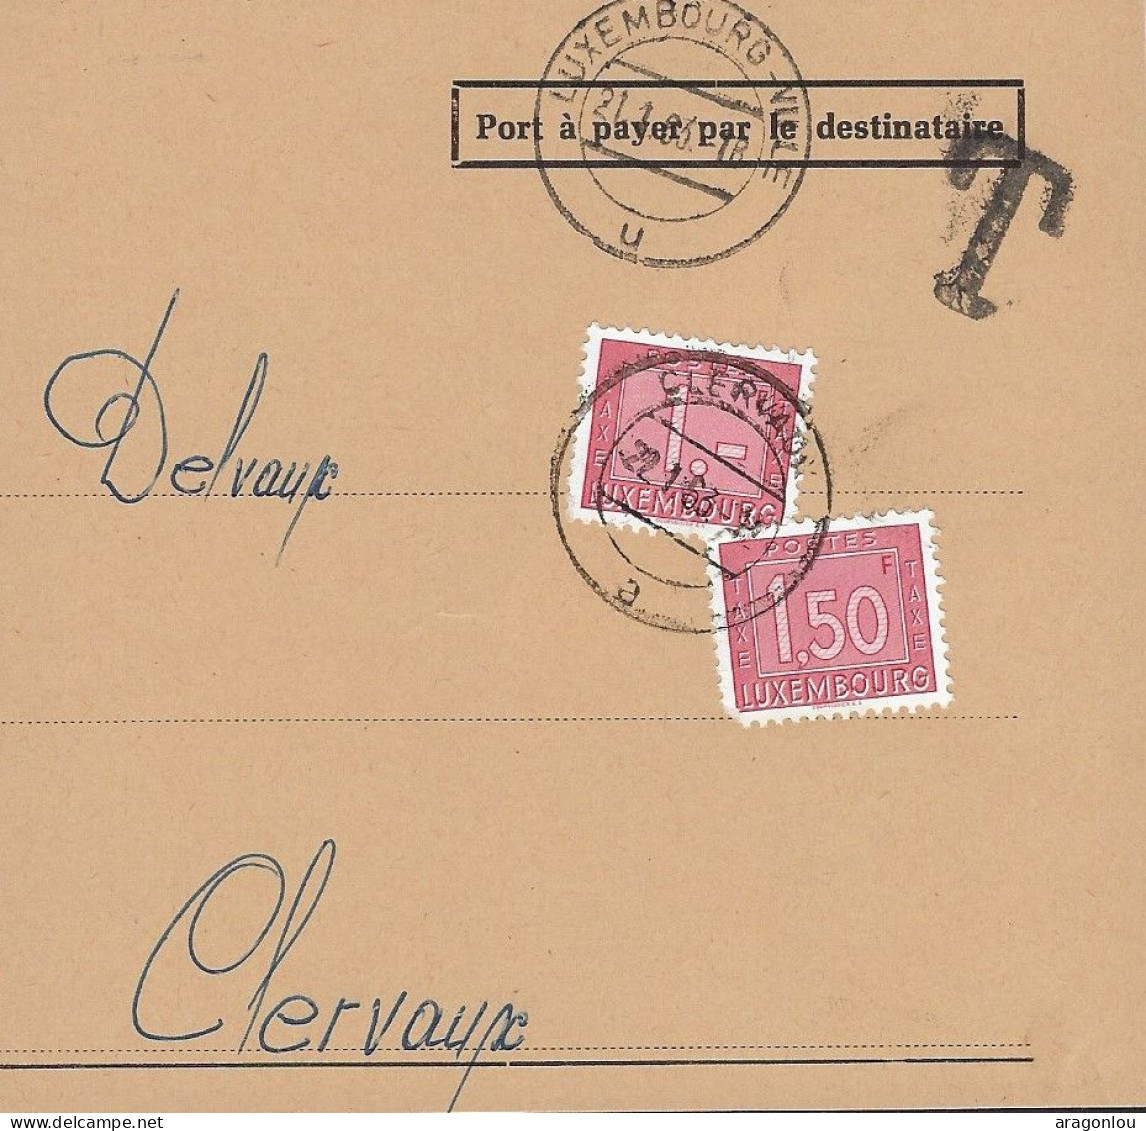 Luxembourg - Luxemburg -   Avant-Lettre  Taxe   1963   Mr Delvaux , Clervaux - Strafport